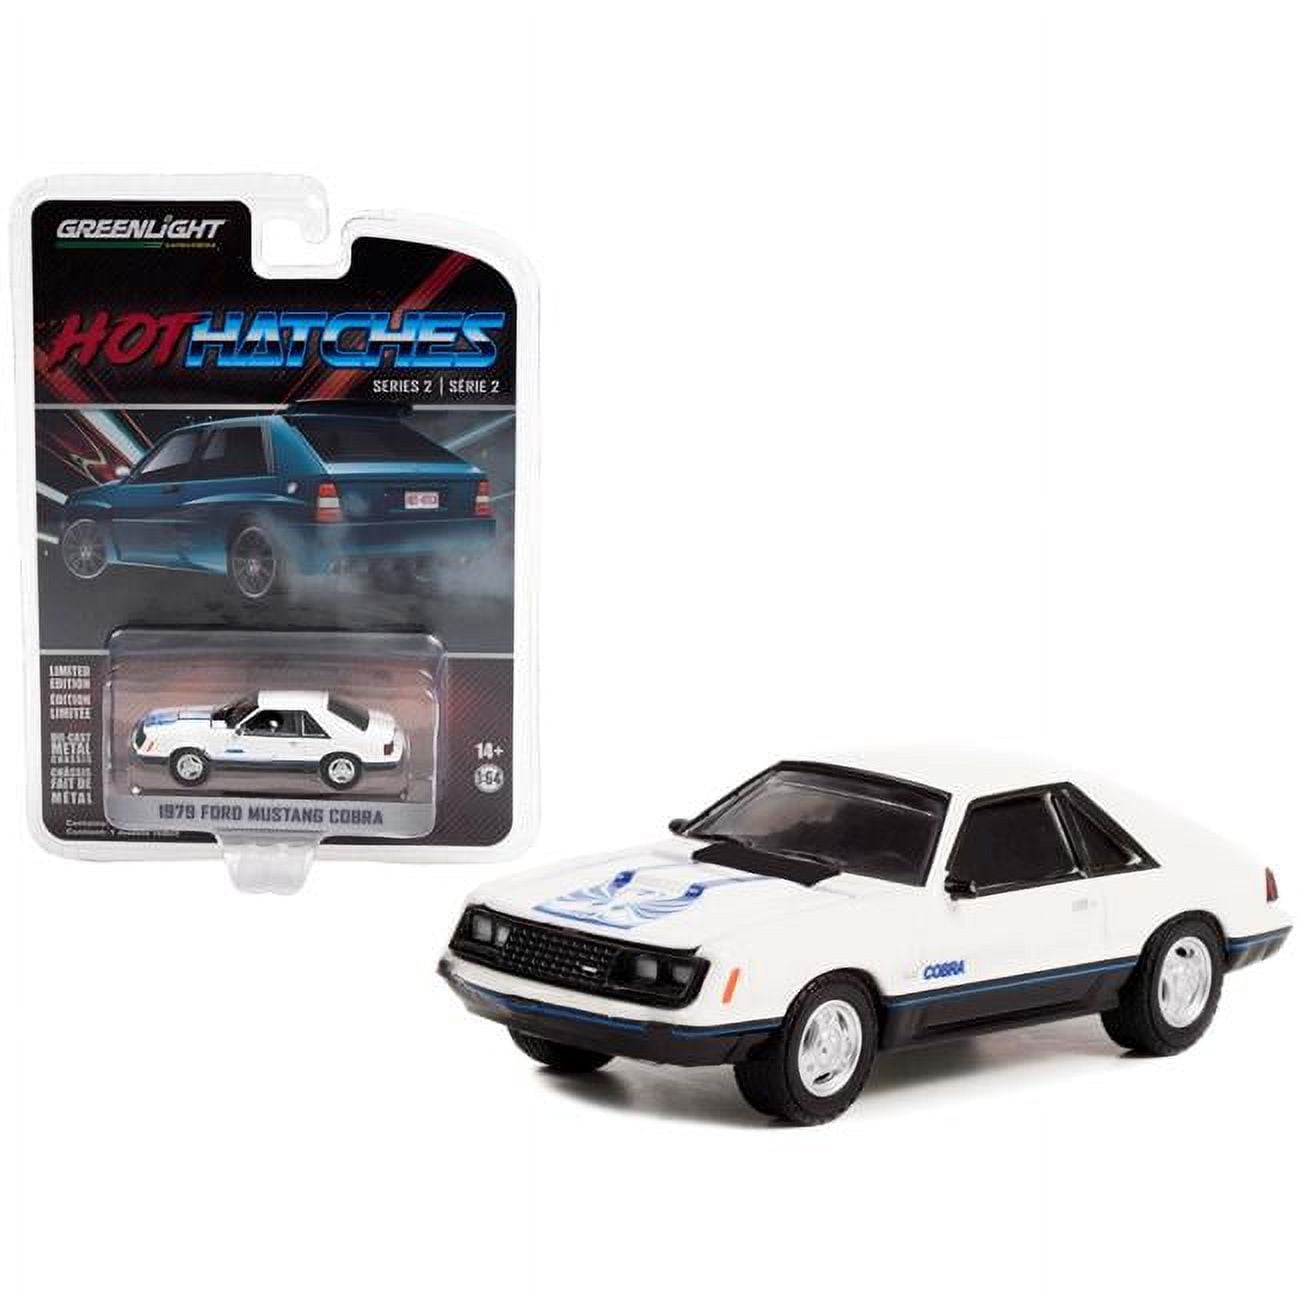 63020C 1979 Ford Mustang Cobra White with Medium Blue Glow Graphics Hot Hatches Series 2 1-64 Diecast Model Car -  GreenLight